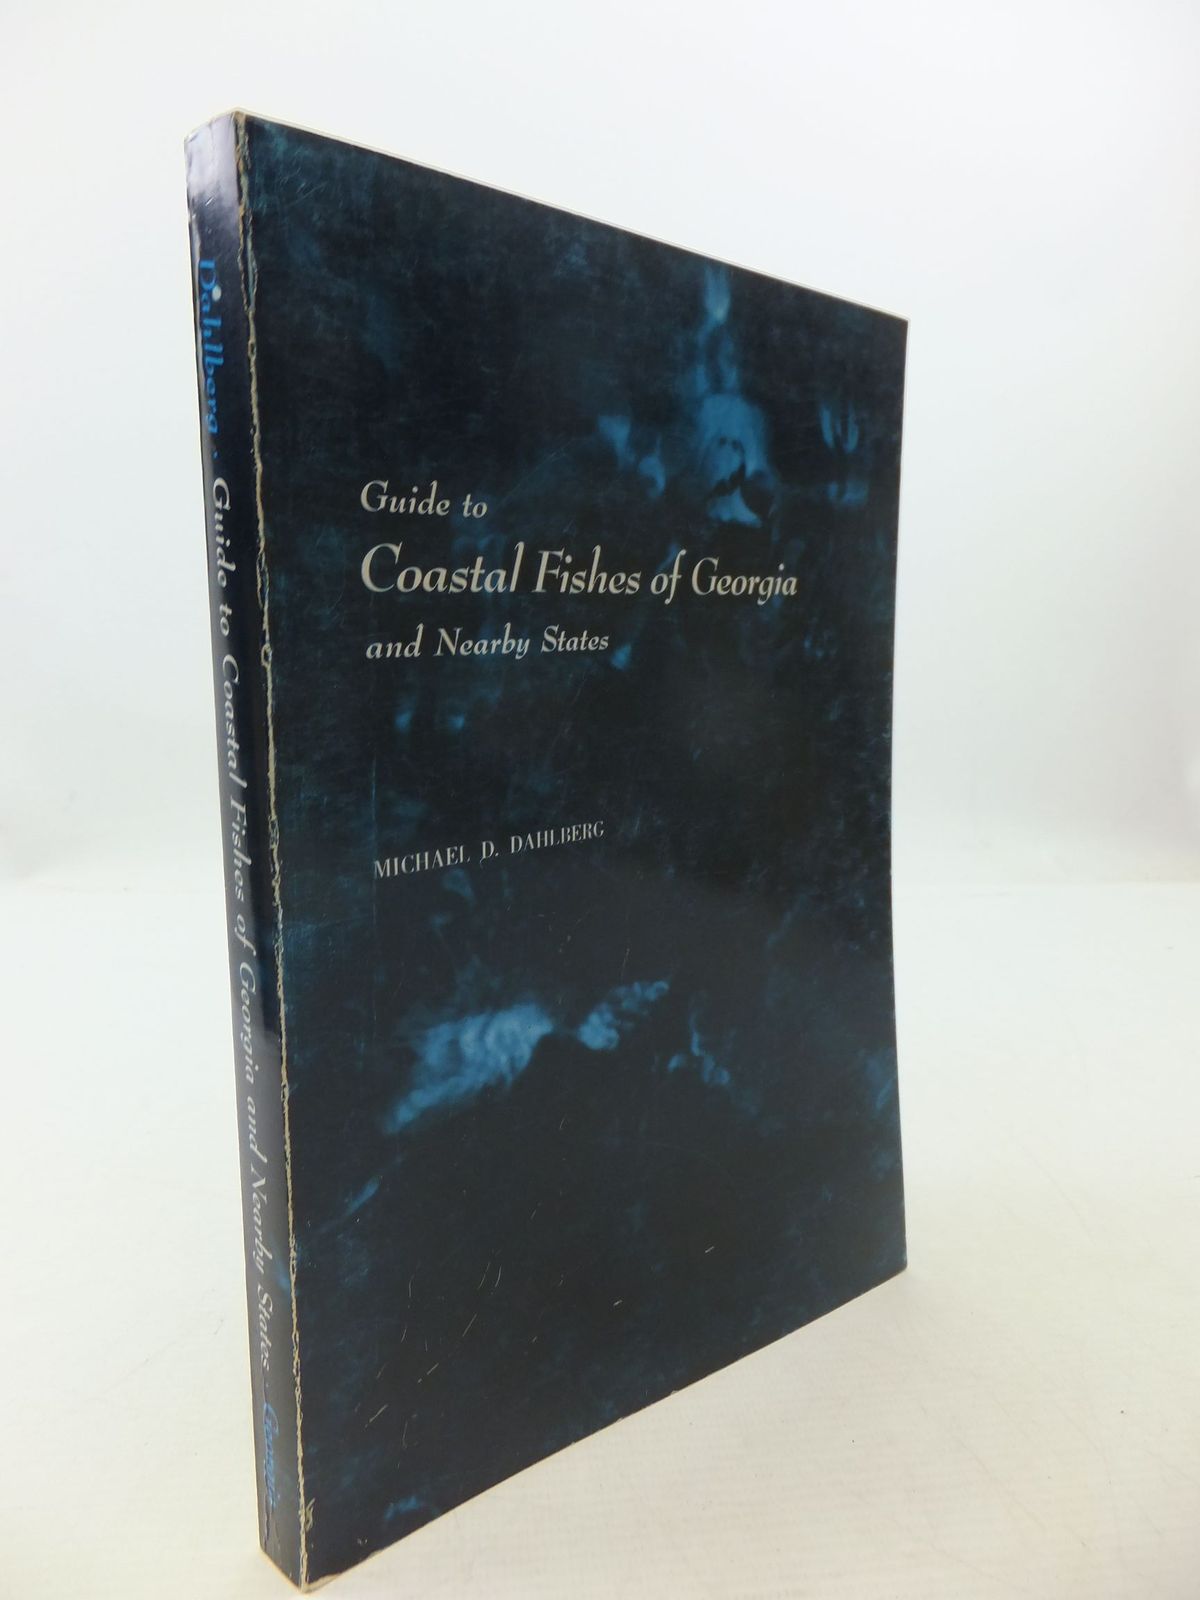 Photo of GUIDE TO COASTAL FISHES OF GEORGIA AND NEARBY STATES written by Dahlberg, Michael D. published by The University of Georgia Press (STOCK CODE: 2111568)  for sale by Stella & Rose's Books